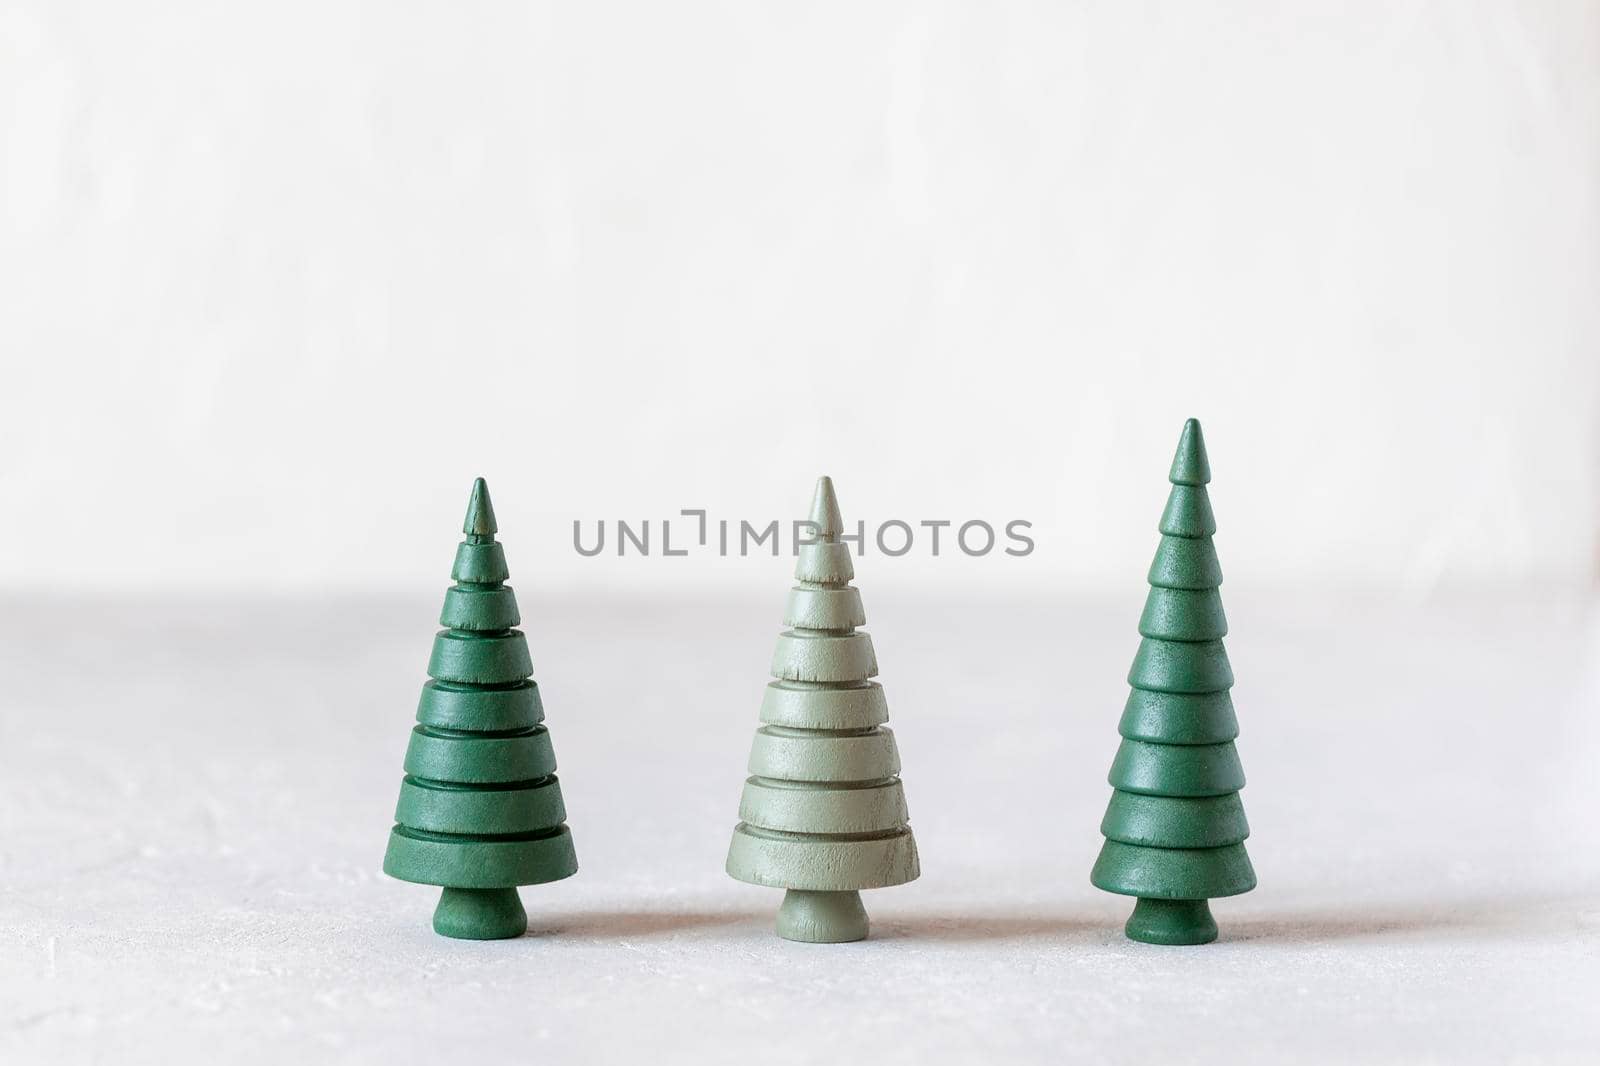 New Year and Christmas wooden decorative trees, zero waste concept